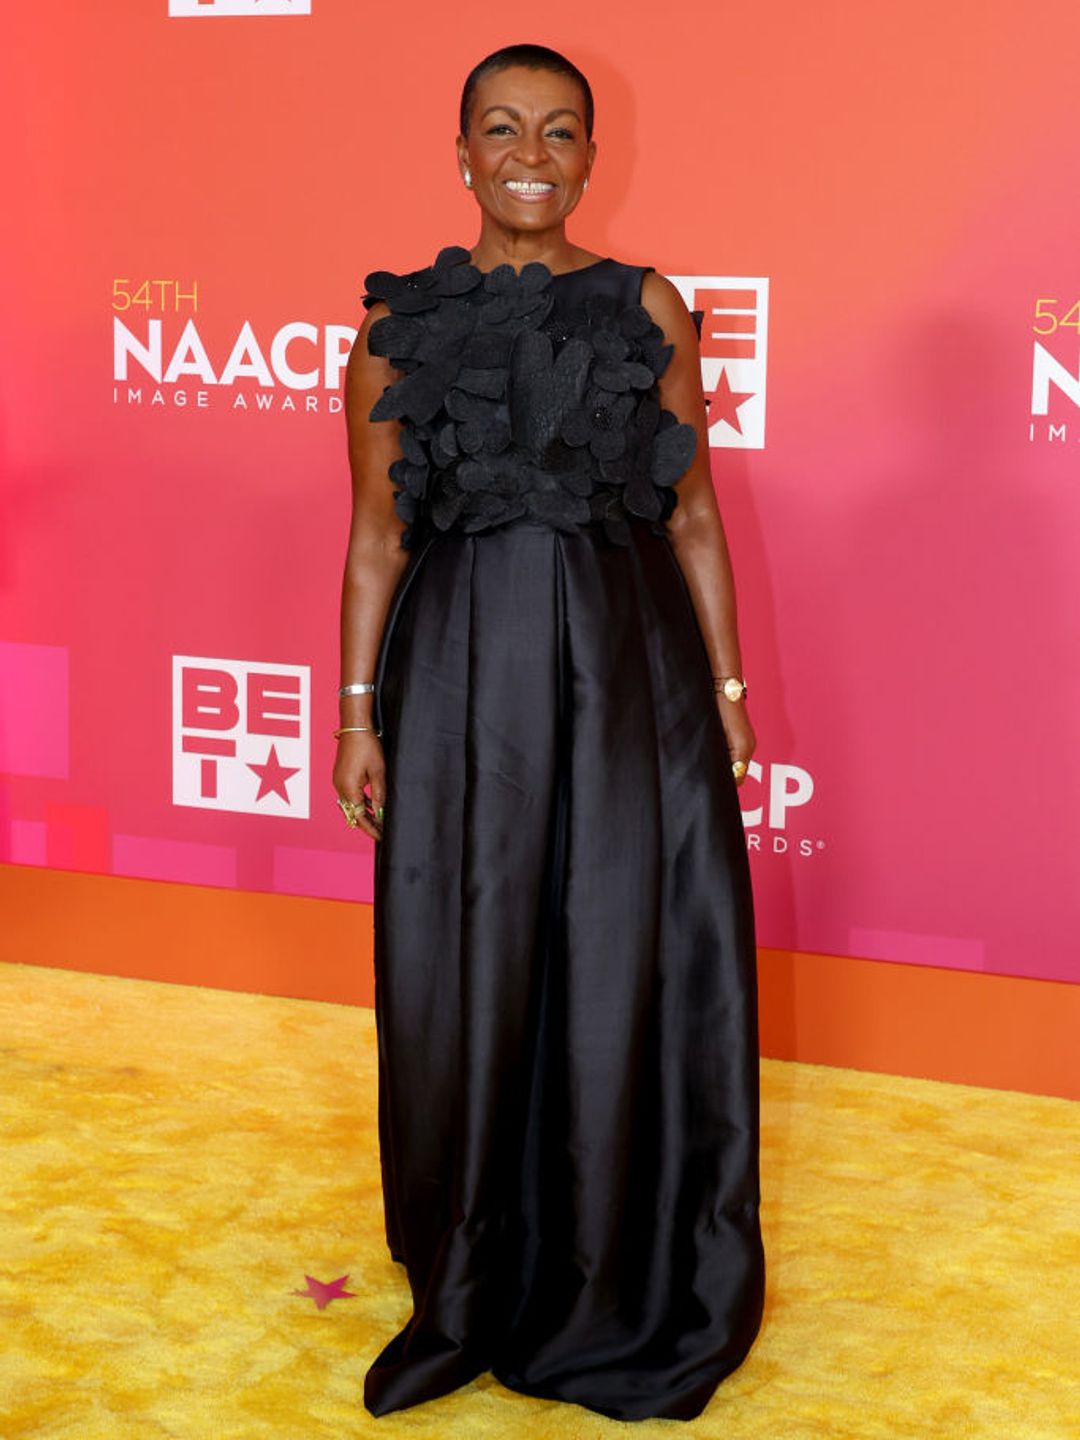 Adjoa attends the 54th NAACP Image Awards. She is wearing a black satin dress. 